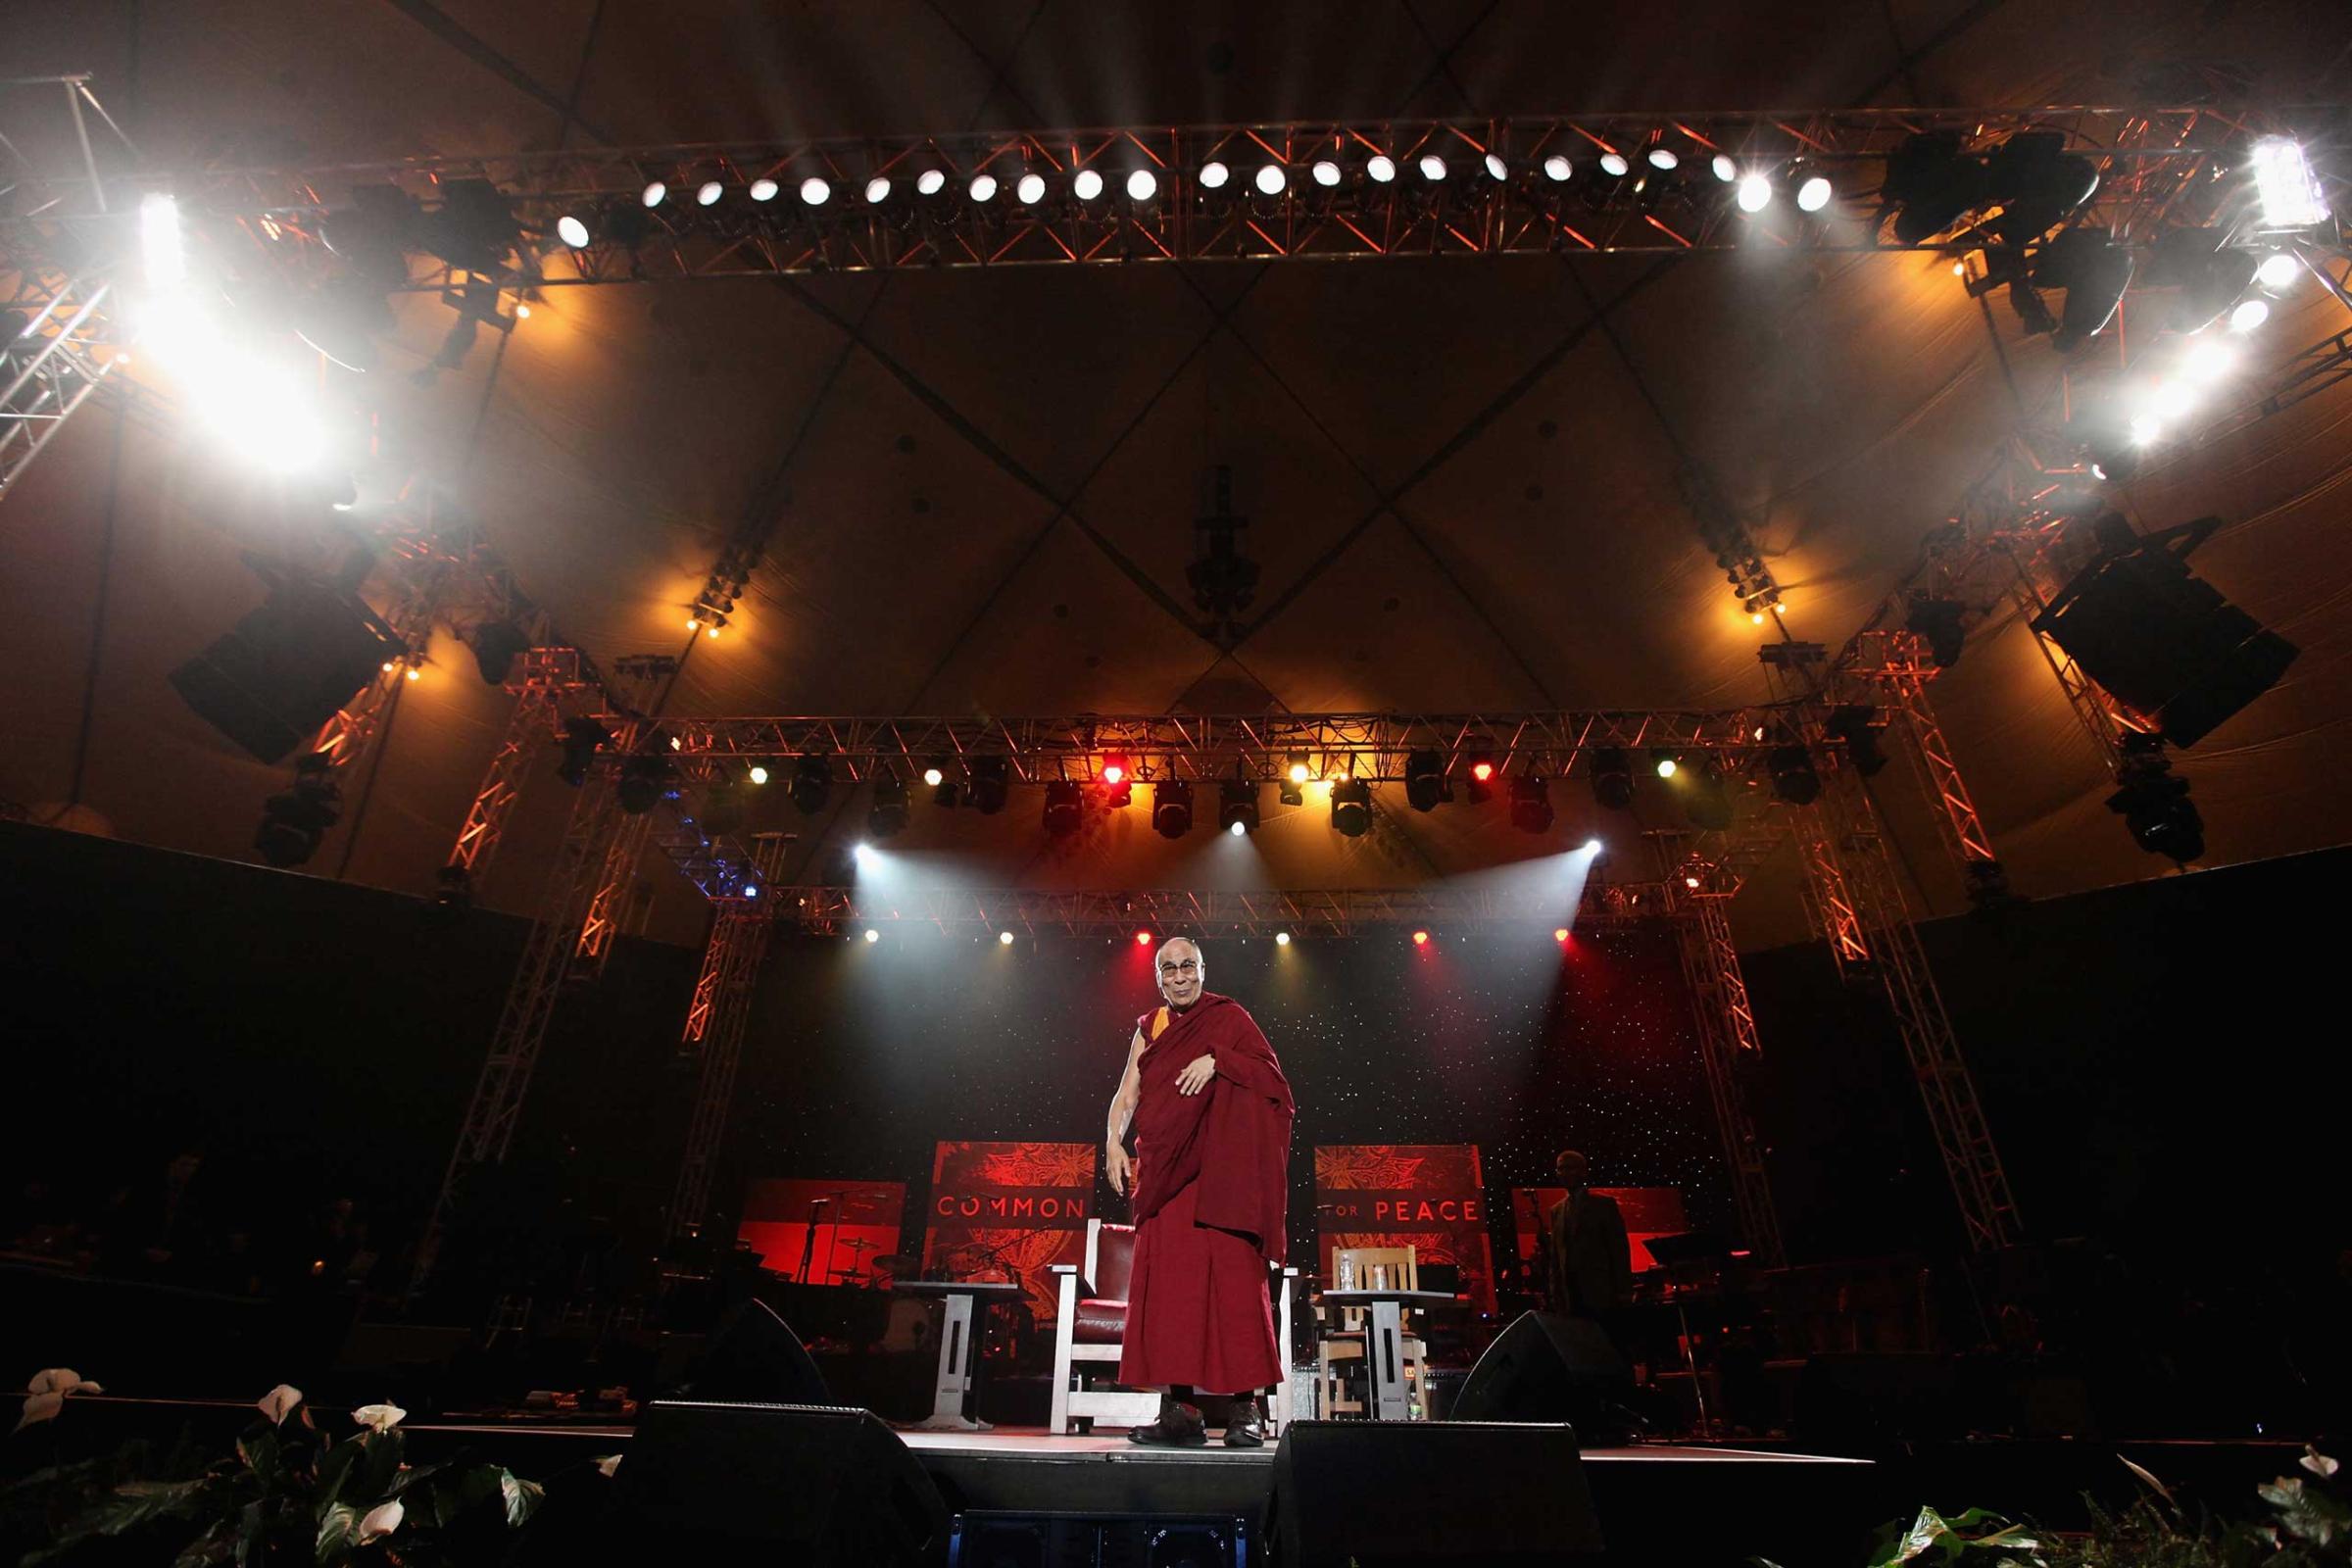 His Holiness the Dalai Lama speaks onstage at the One World Concert at Syracuse University in Syracuse, New York, Oct. 2012.